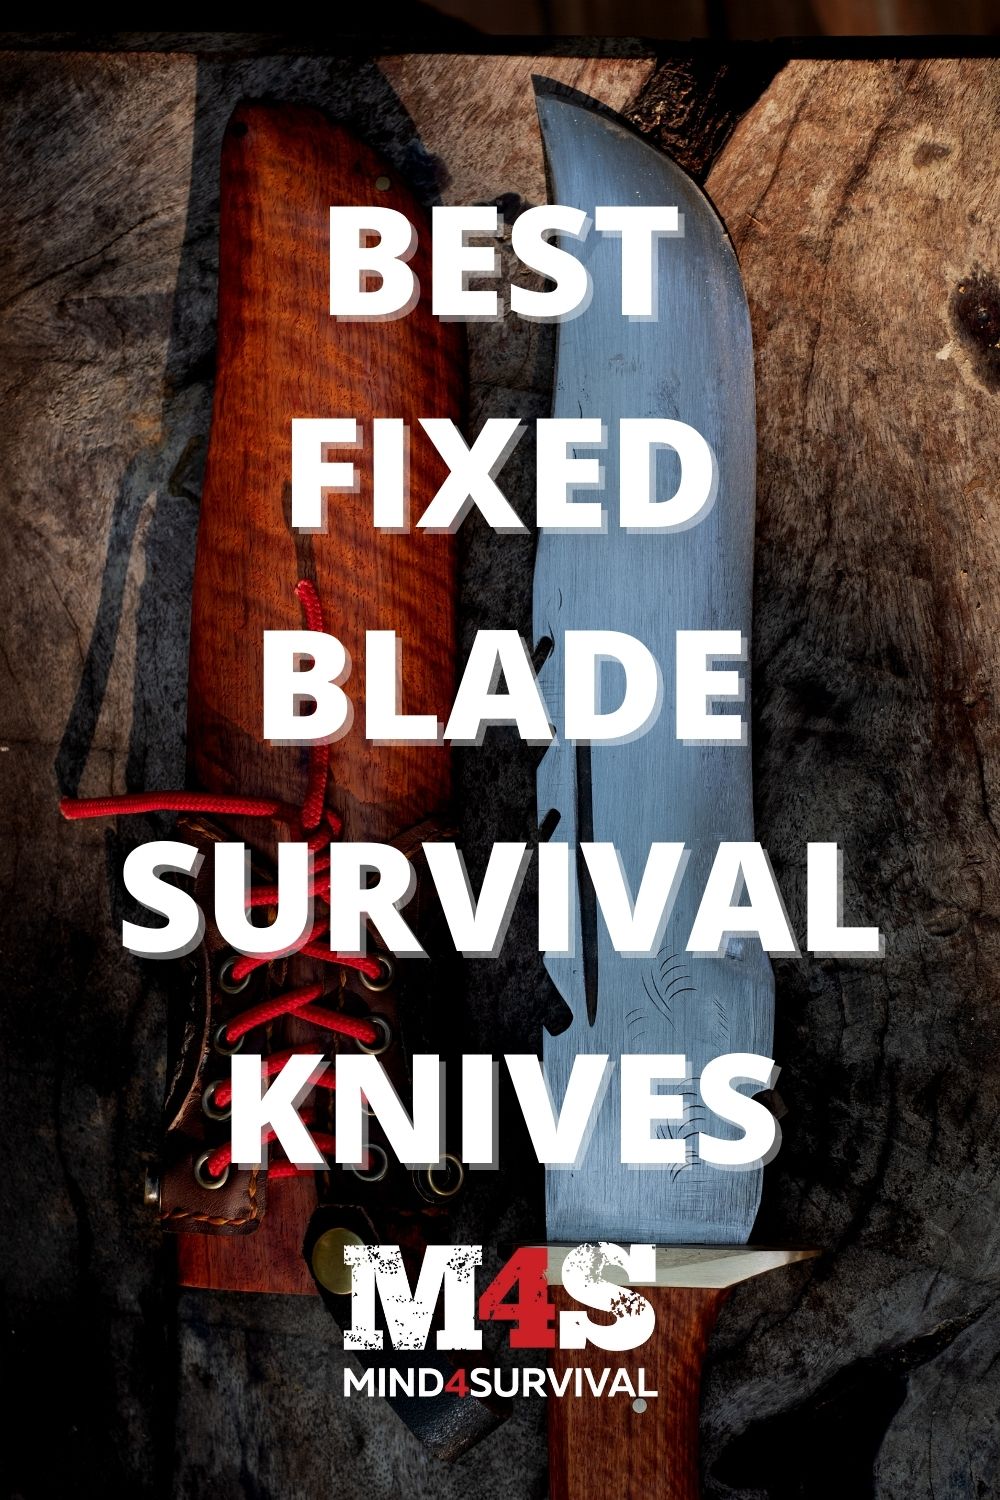 7 Best Fixed Blade Knives - Reviews & Guide (2022)